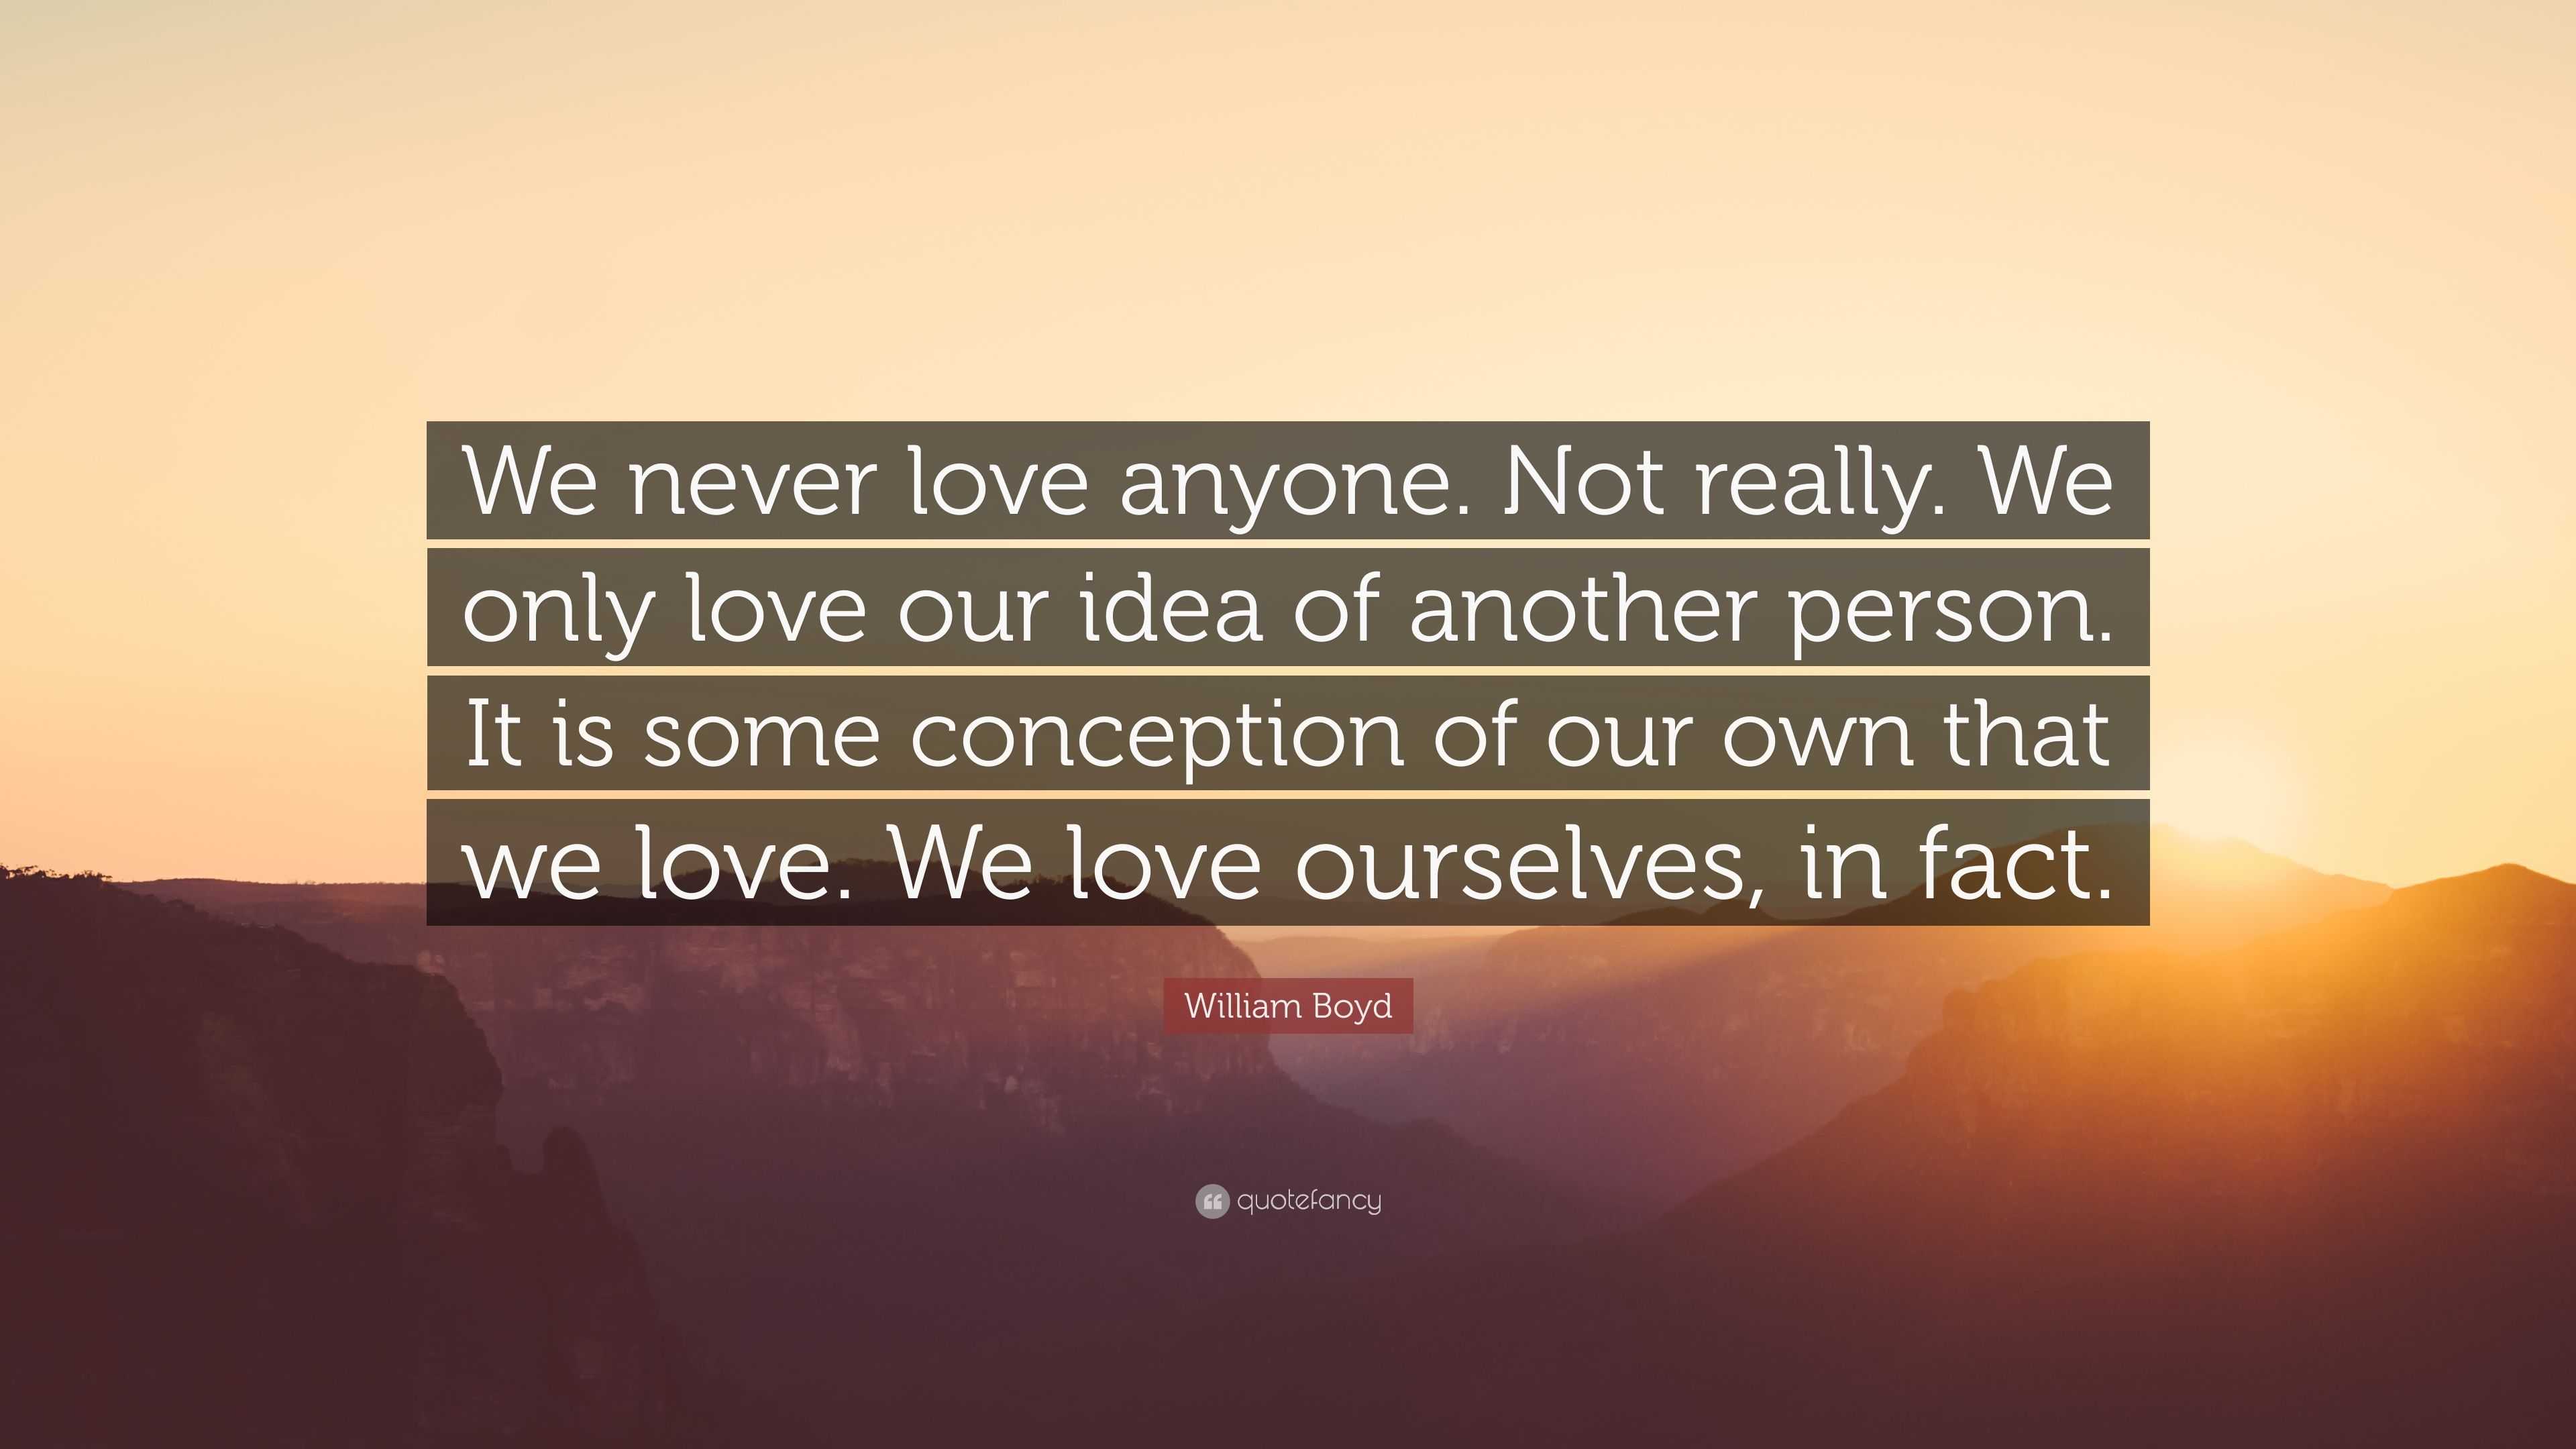 William Boyd Quote “We never love anyone Not really We only love